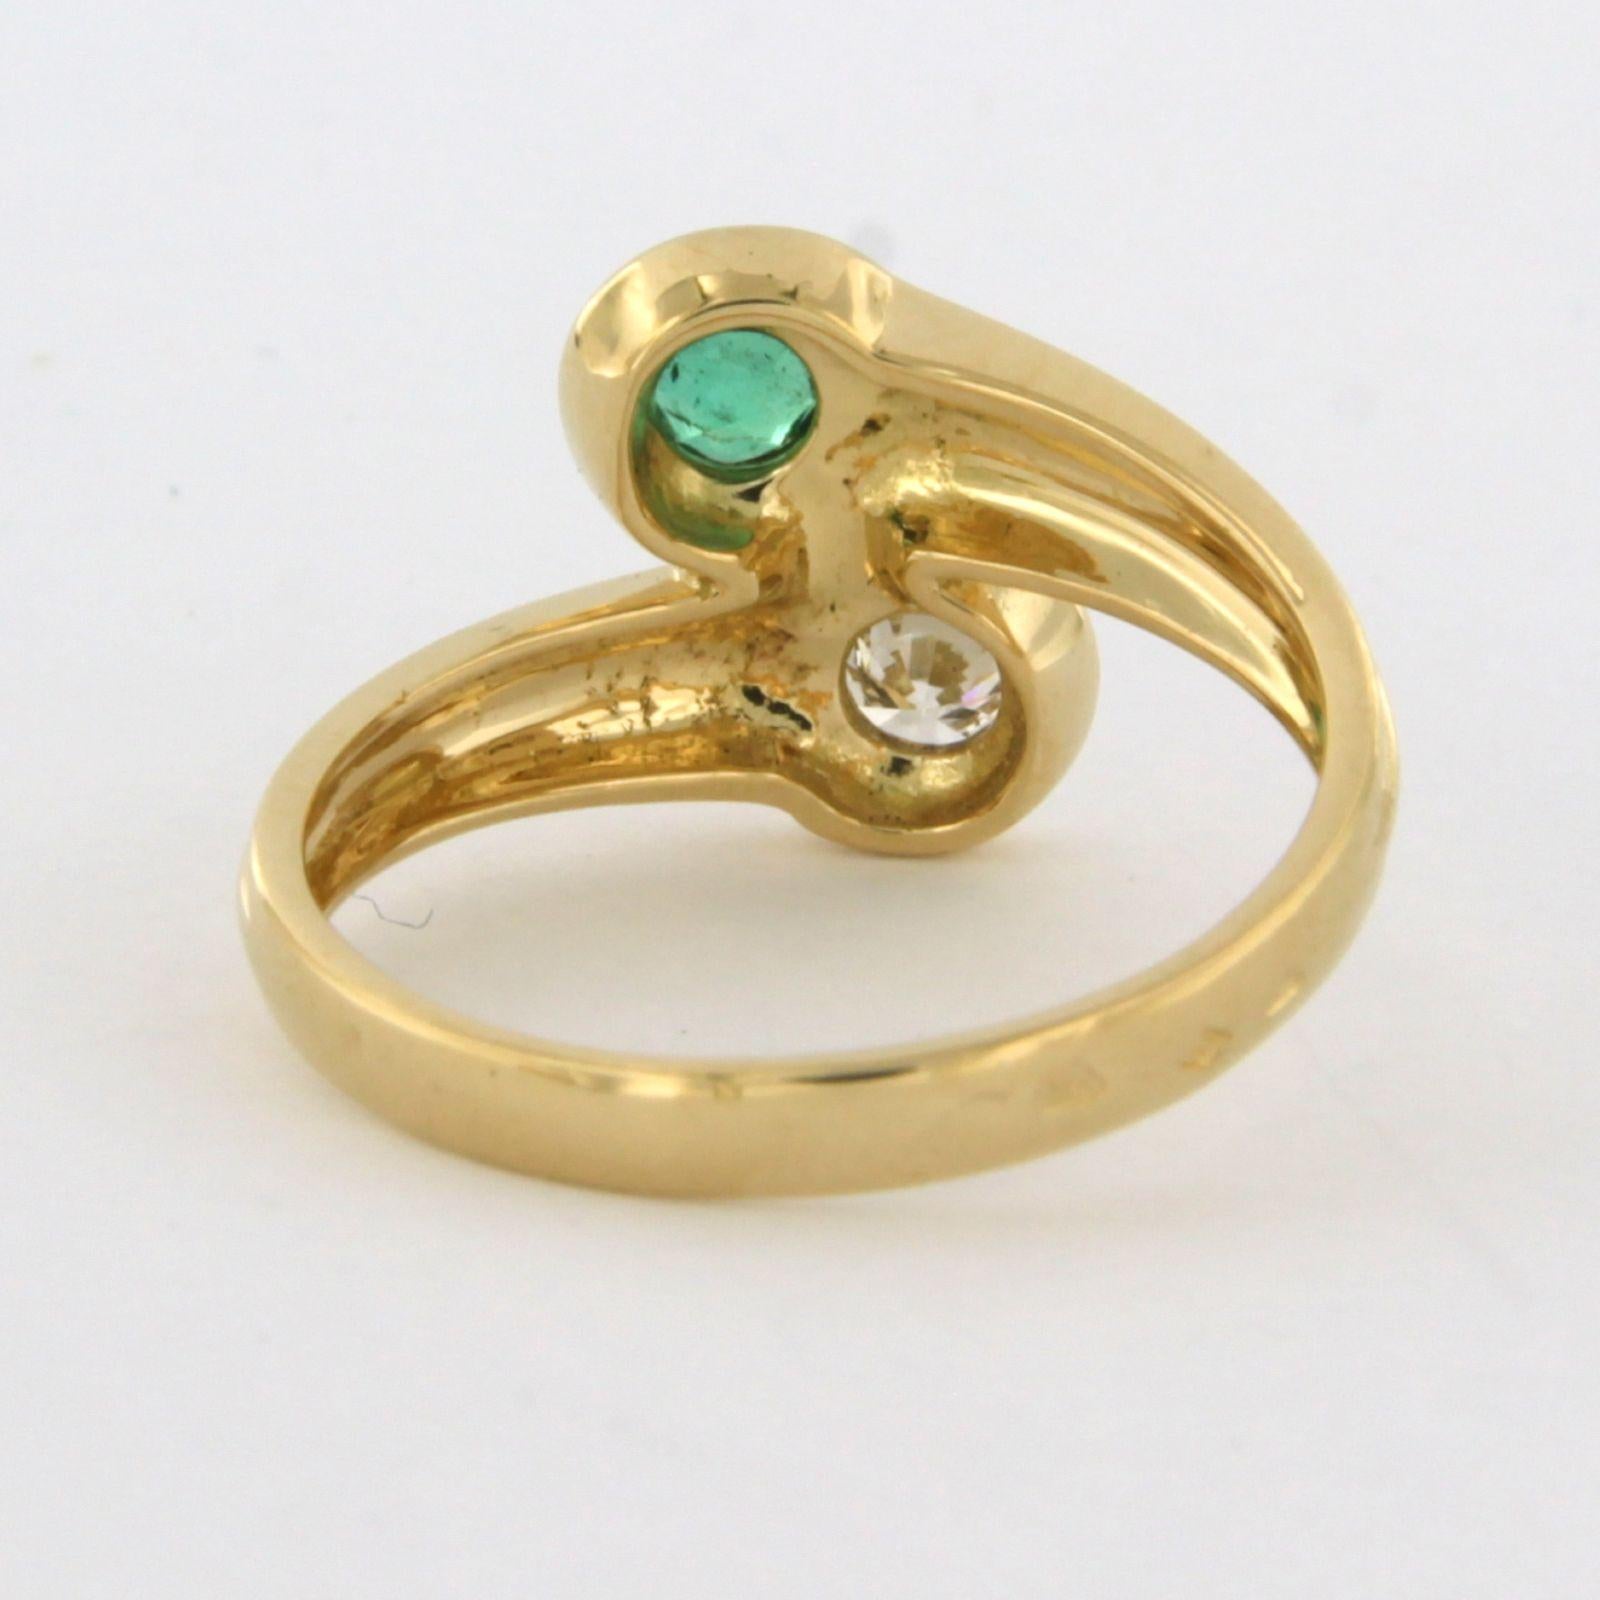 Women's Ring with emerald and diamond 18k yellow gold